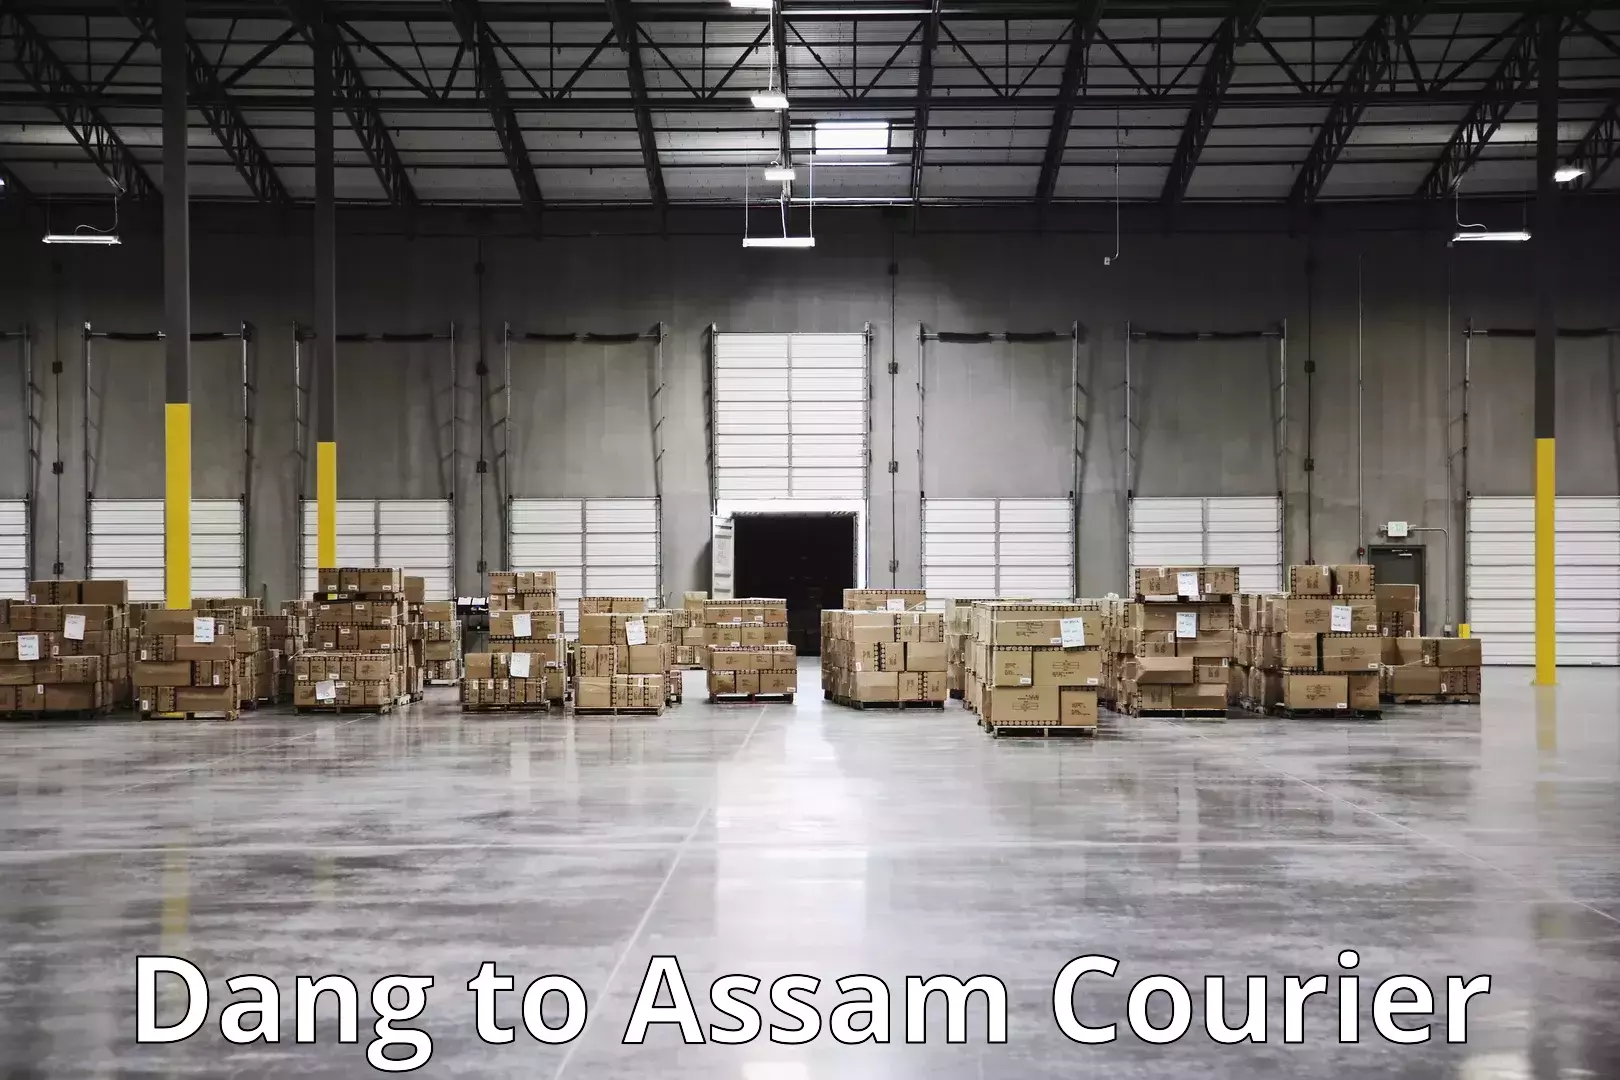 Furniture delivery service Dang to Assam